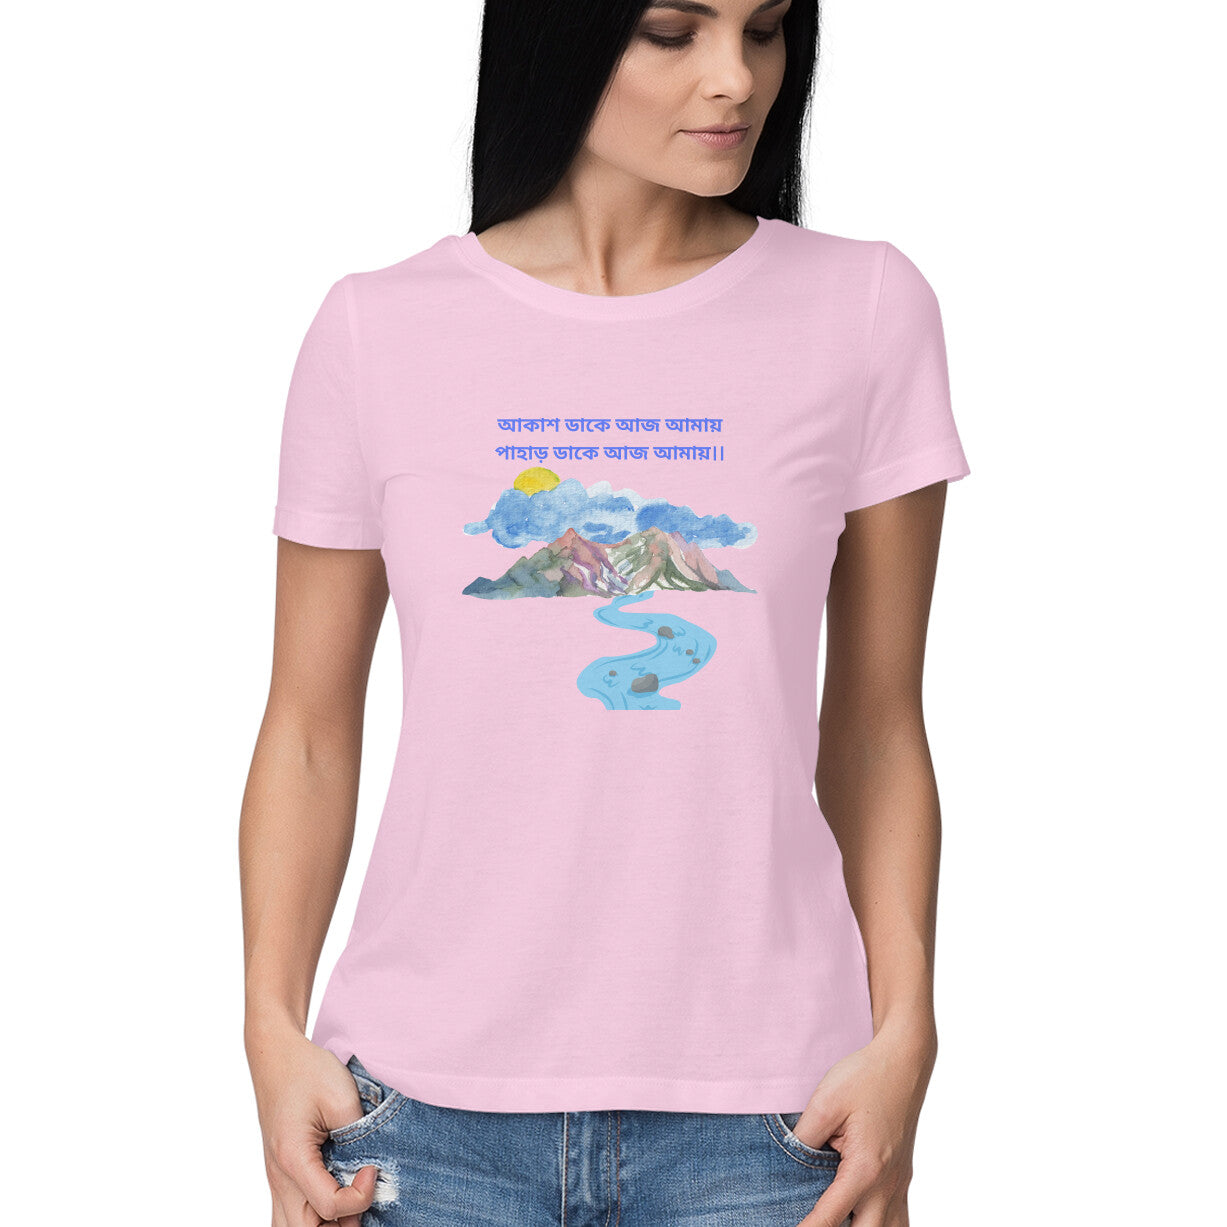 Mountain Calling: Women's Round Neck T-Shirt for Nature Enthusiasts